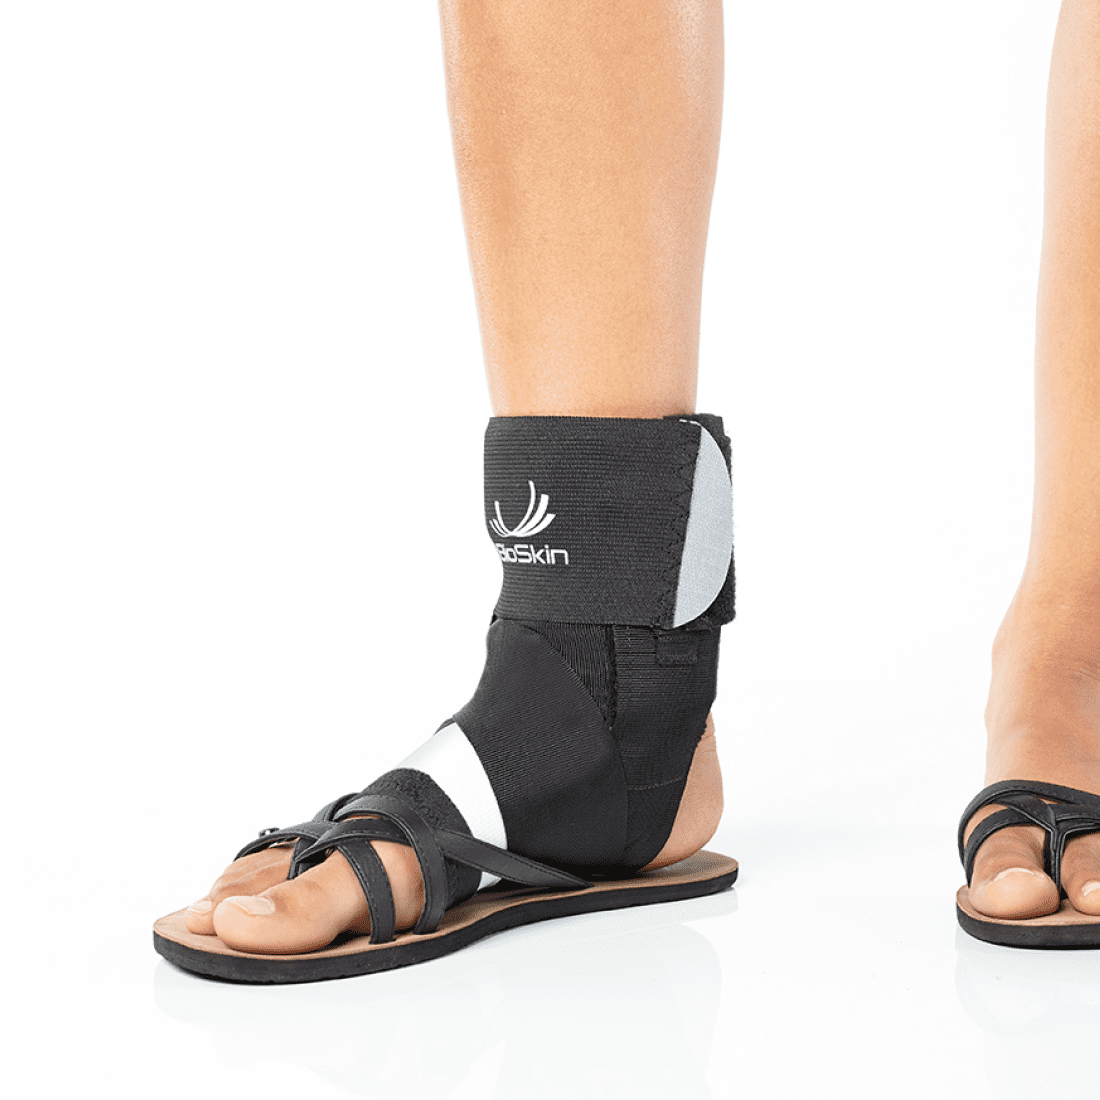 Plantar Fasciitis BioSkin Trilok Ankle Brace By Versatile Ankle Support PTTD Lightweight and Hypoallergenic Small Ankle Sprains 